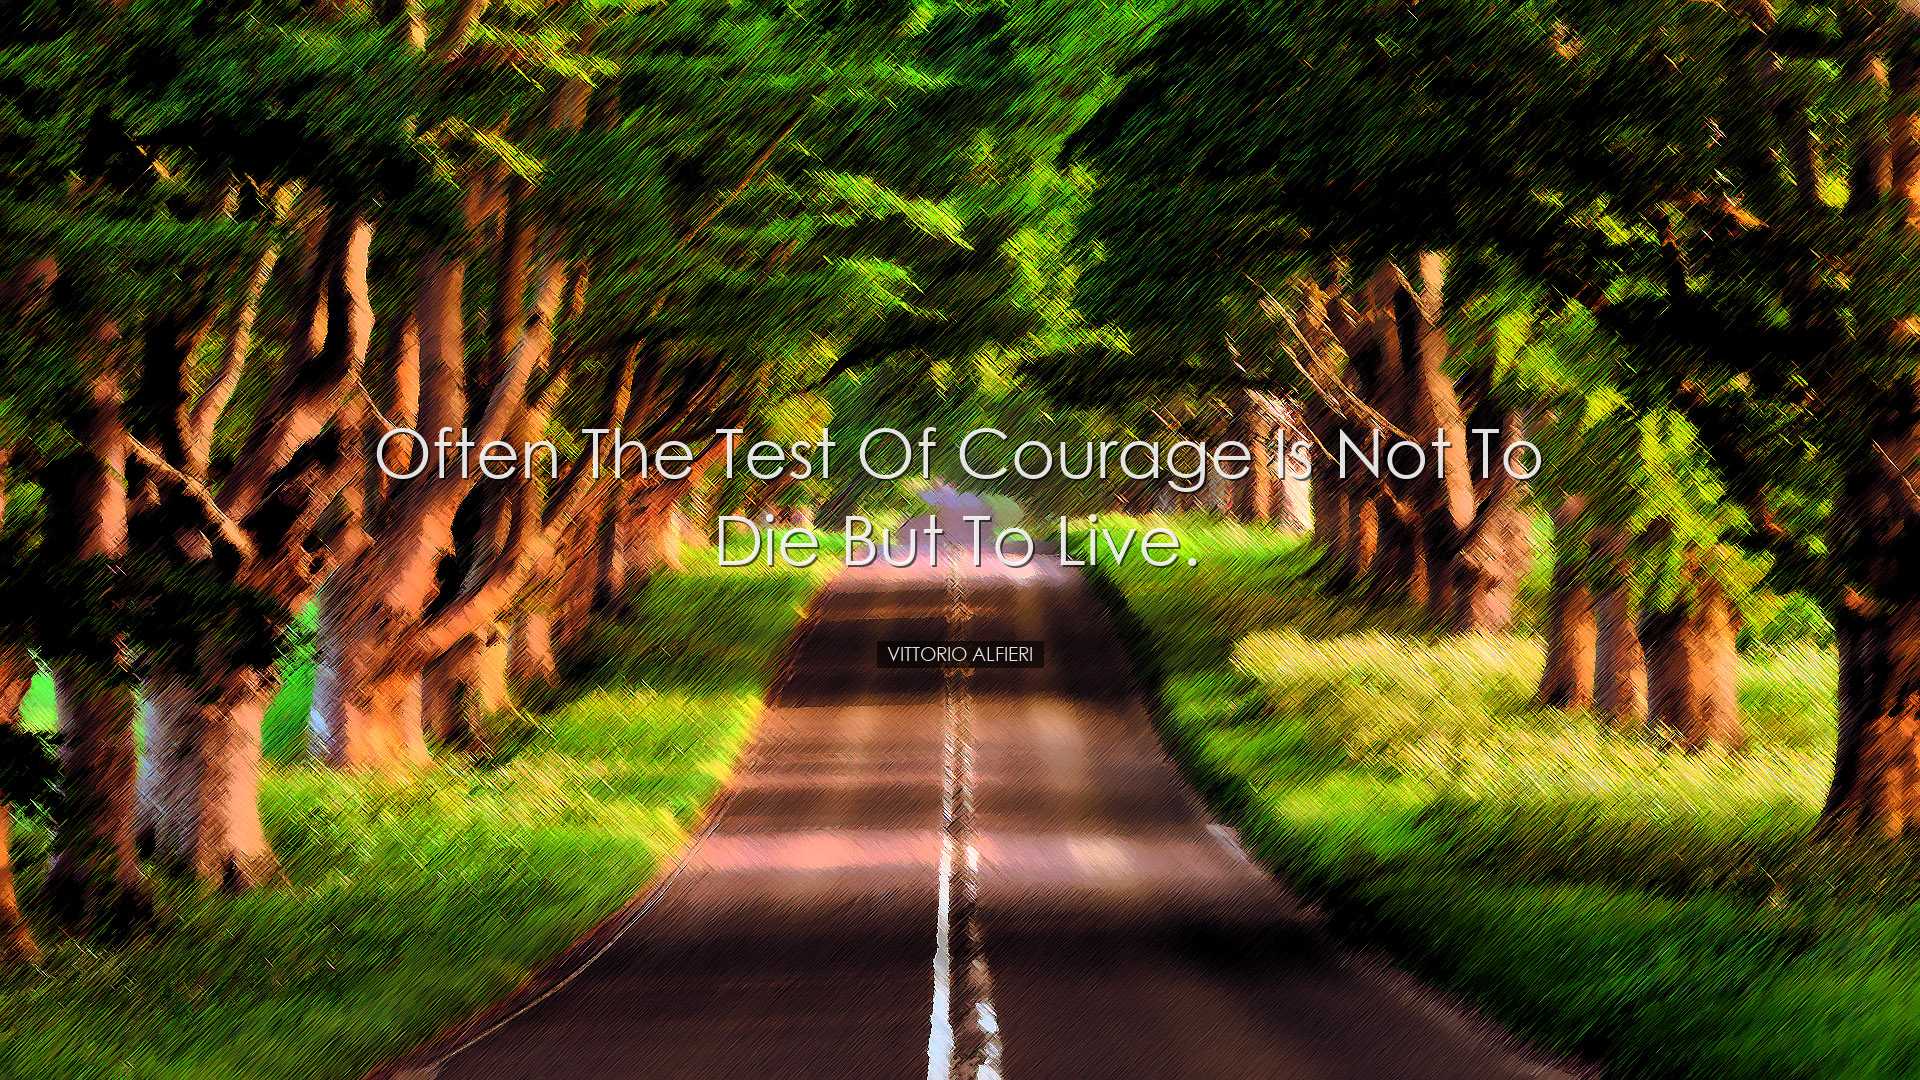 Often the test of courage is not to die but to live. - Vittorio Al